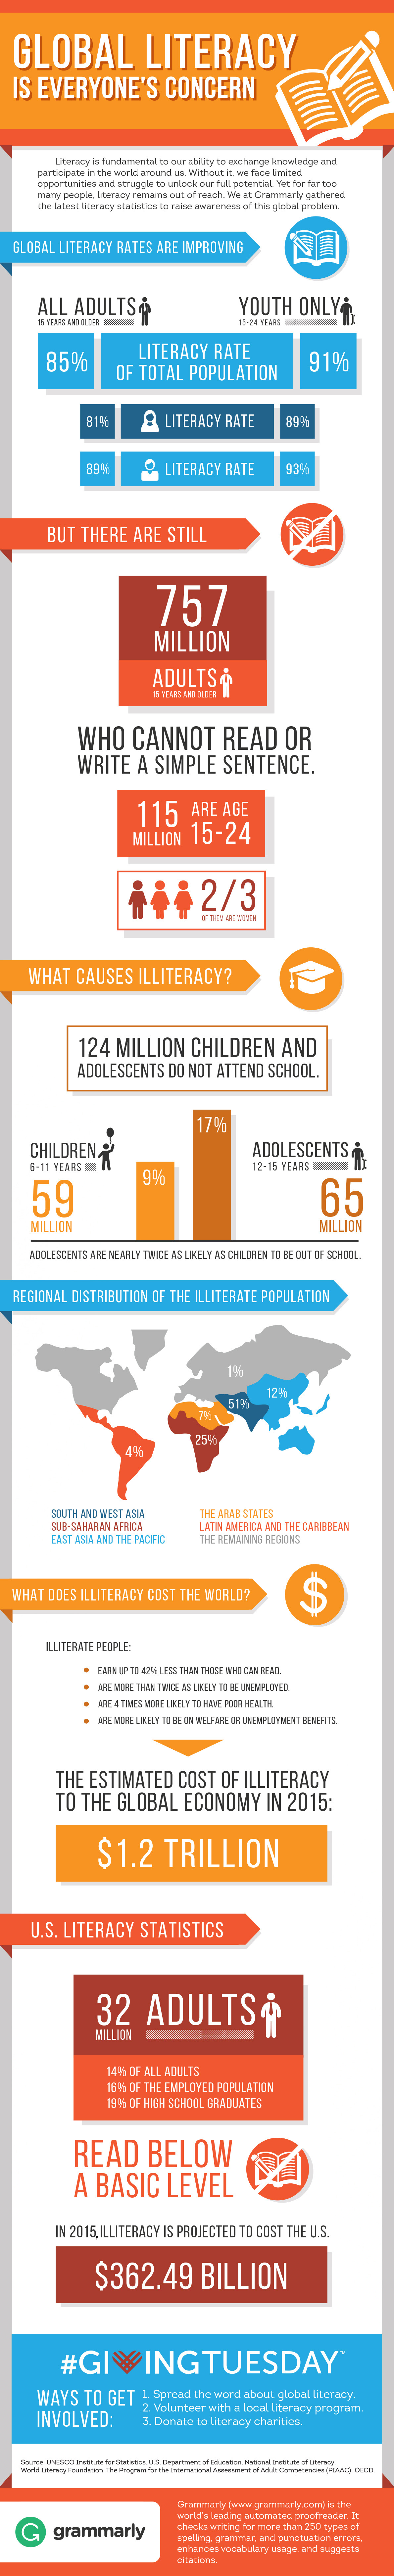 Global Literacy Infographic